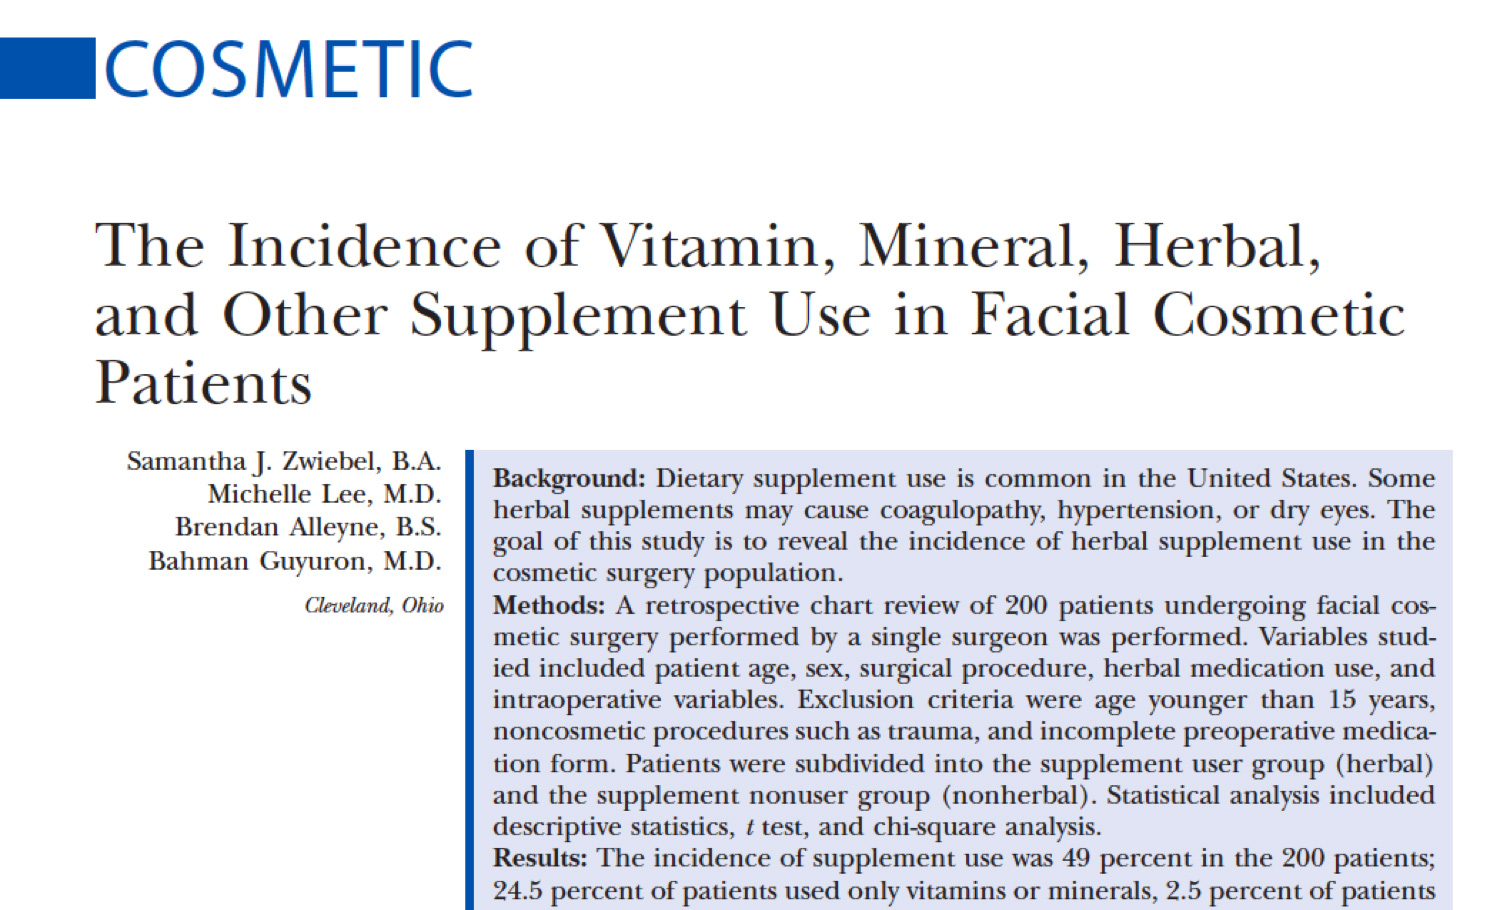 The Incidence of Vitamin, Mineral, Herbal, and Other Supplement Use in Facial Cosmetic Patients